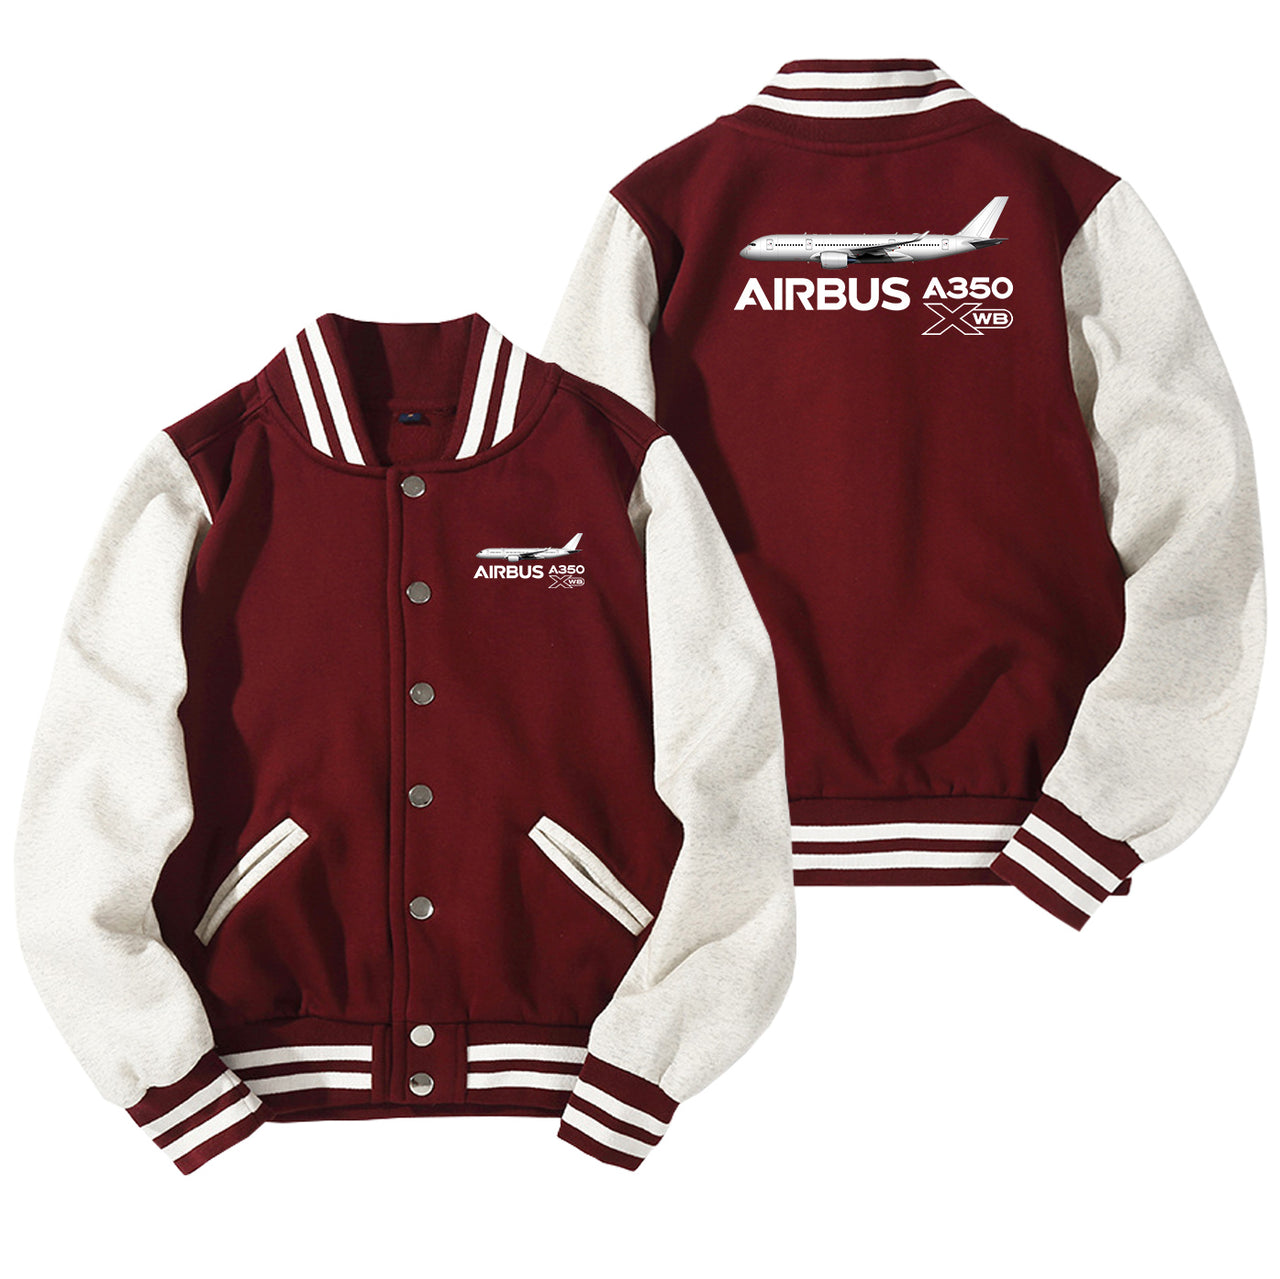 The Airbus A350 WXB Designed Baseball Style Jackets